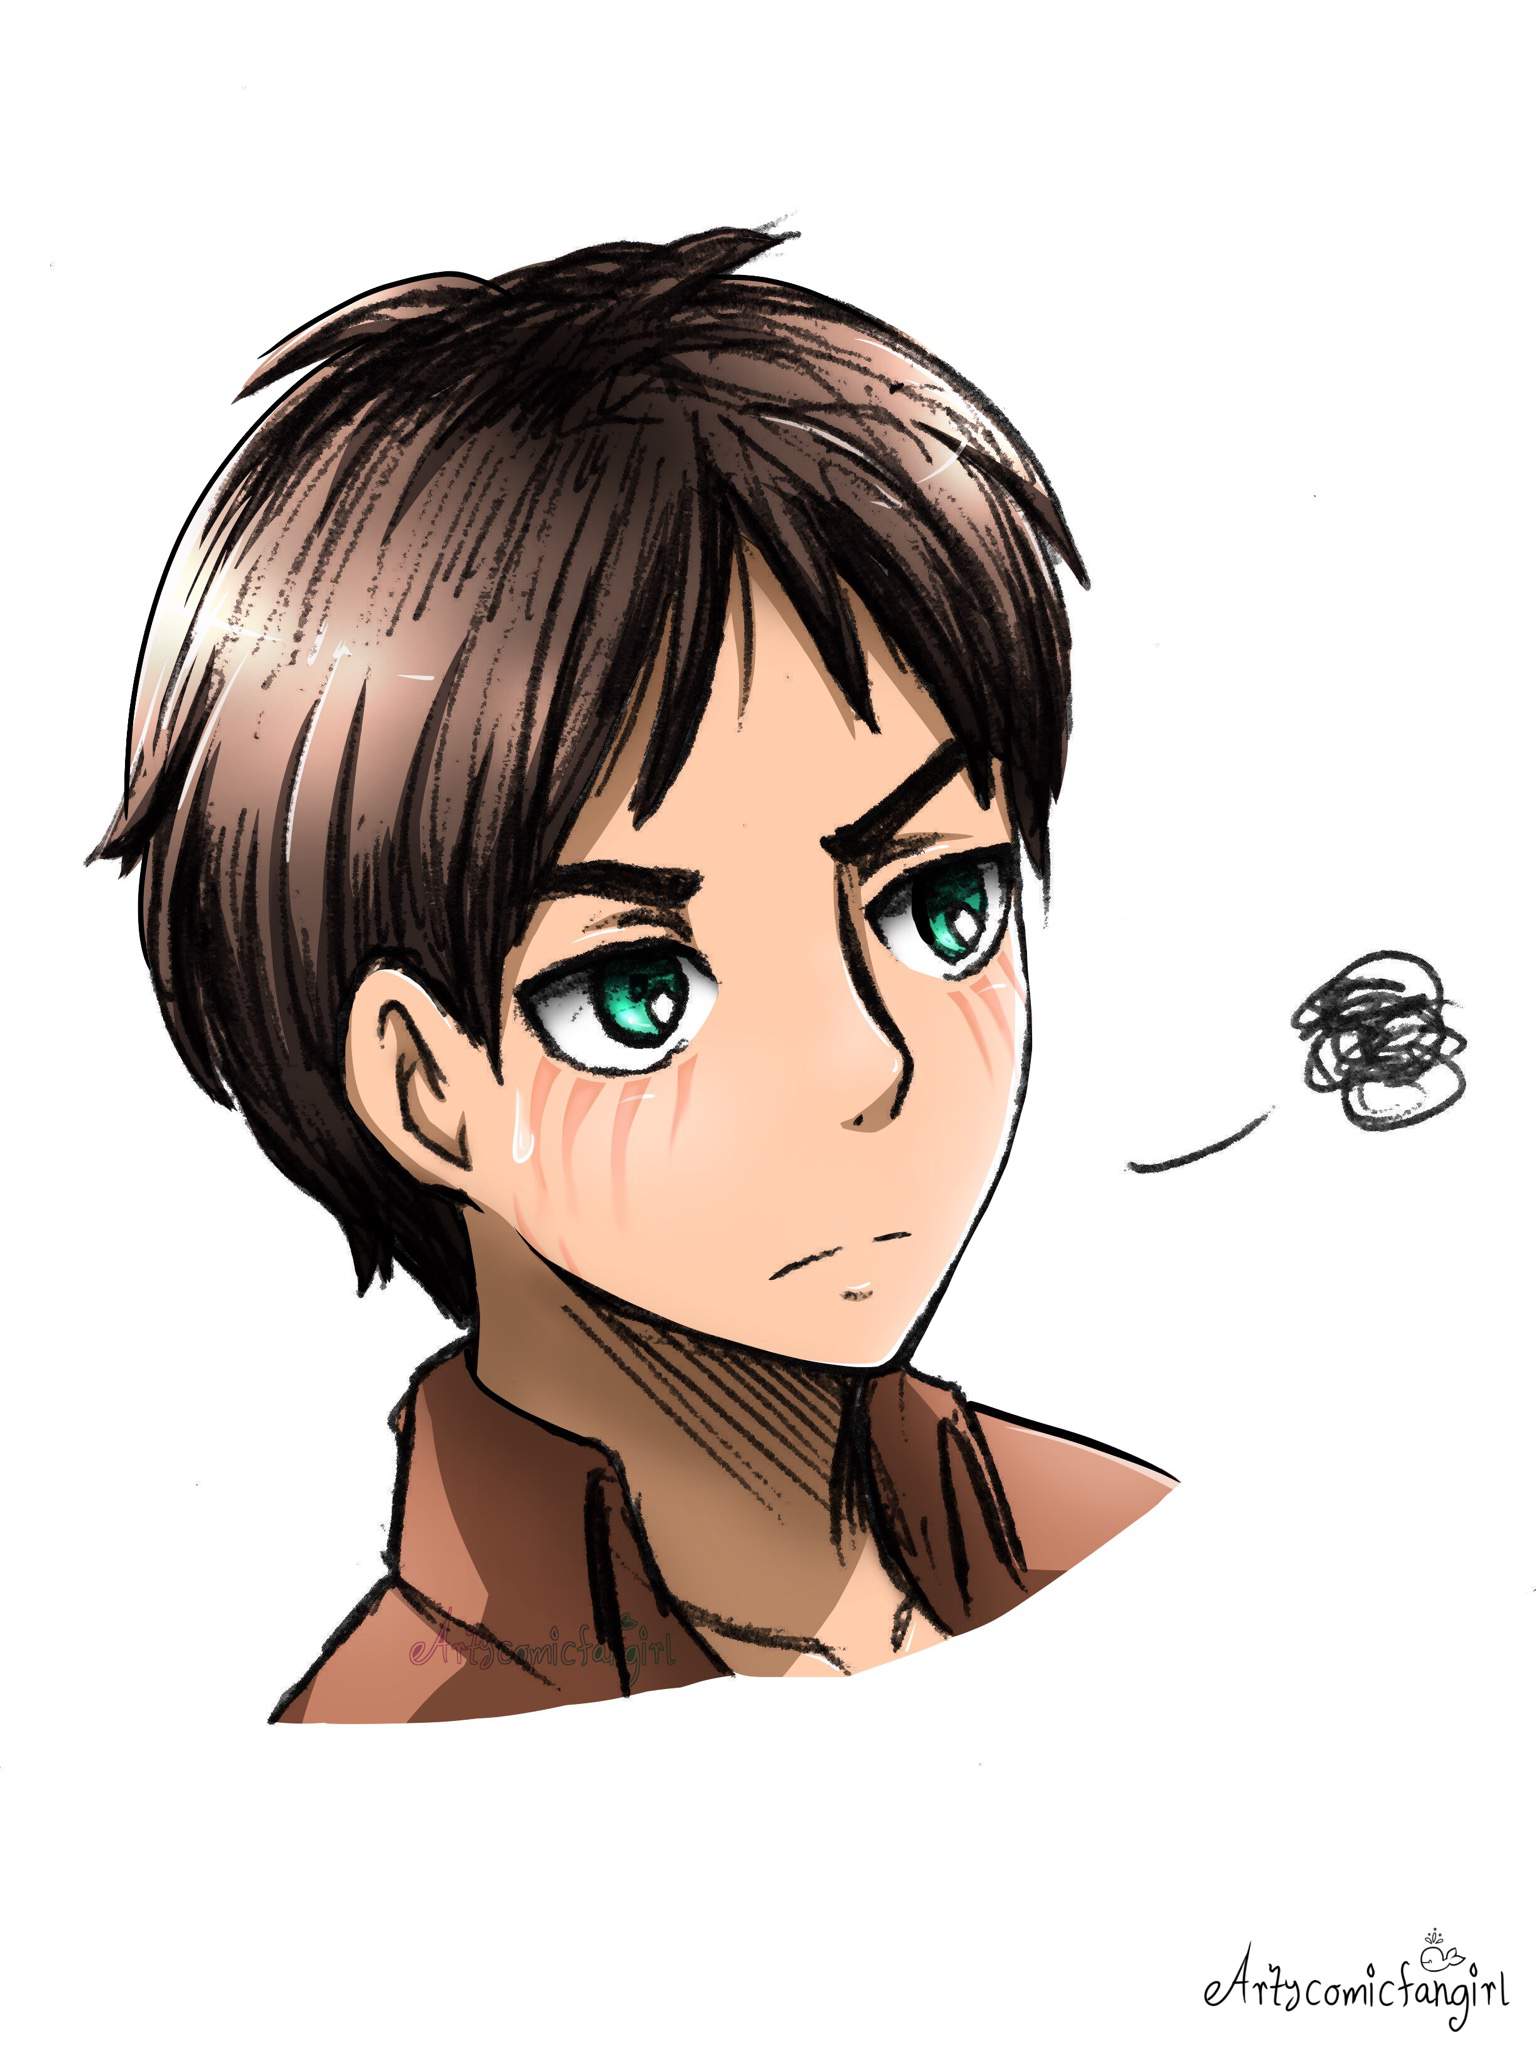 Traditional To Digital Eren Jaeger Fanart Attack On Titan Amino I used only pencils for sketching and drawing. amino apps